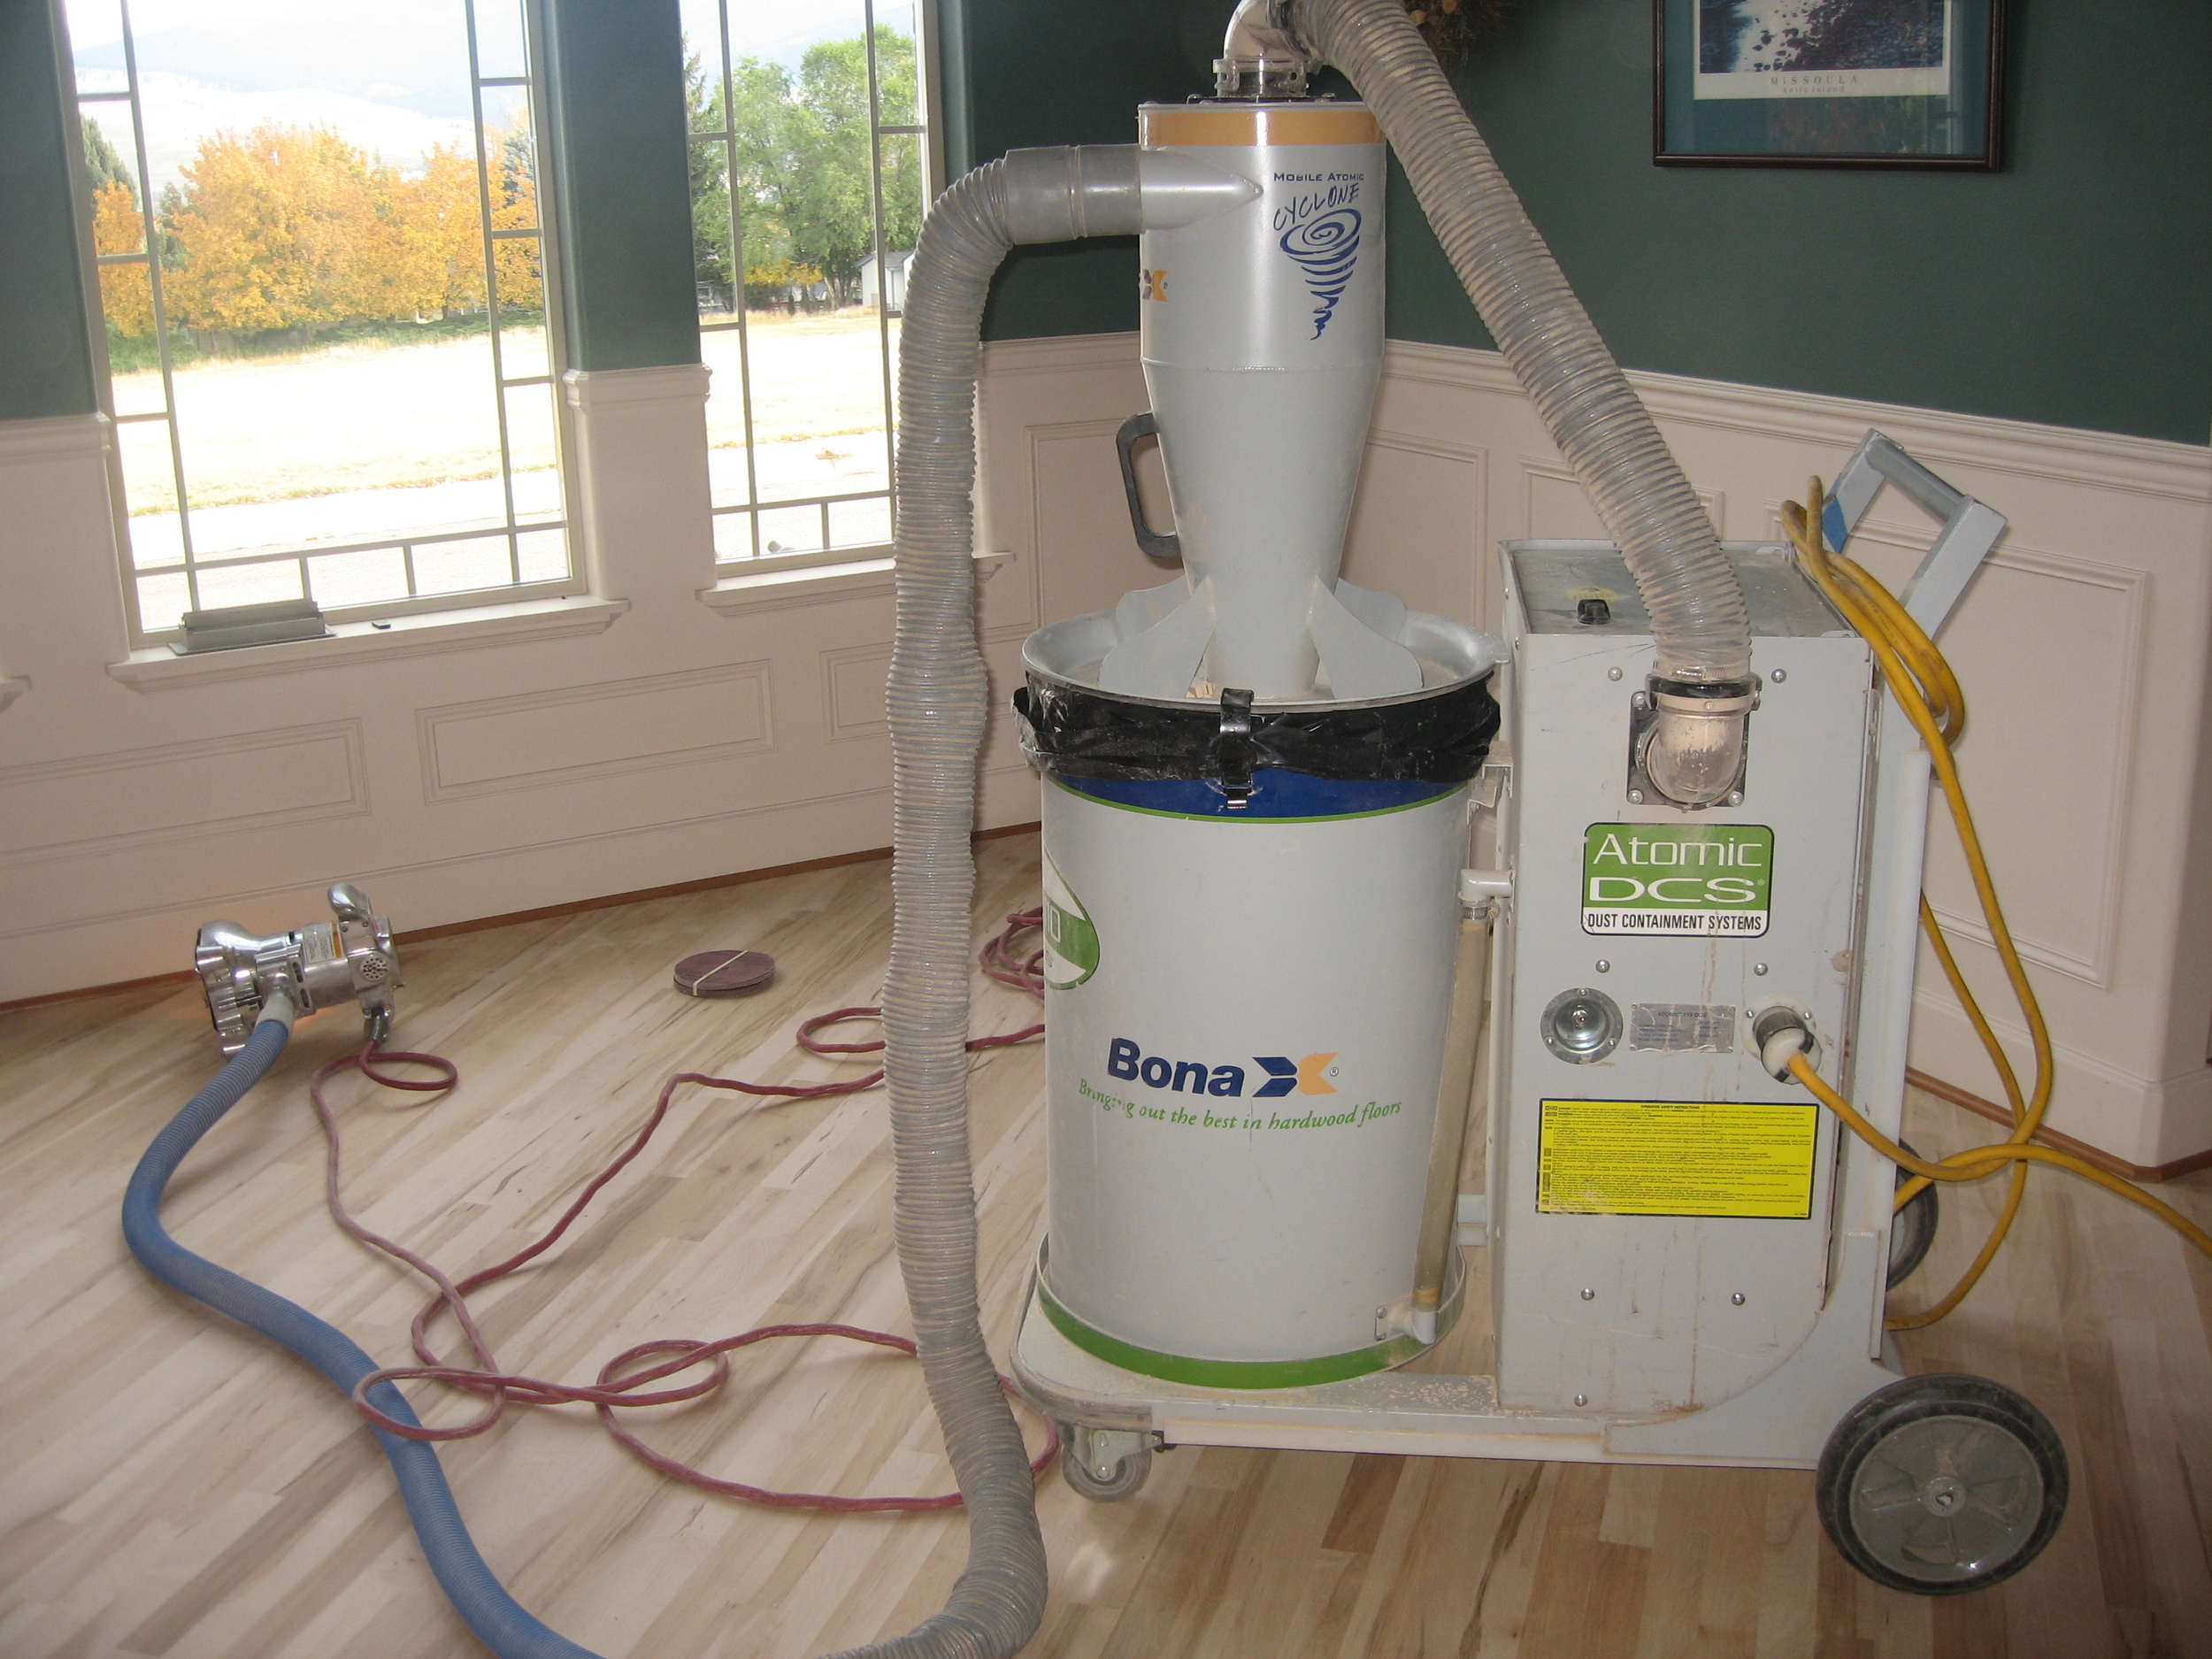   State of the Art Dust Containment   for a Dustless Wood Flooring Experience   See More  